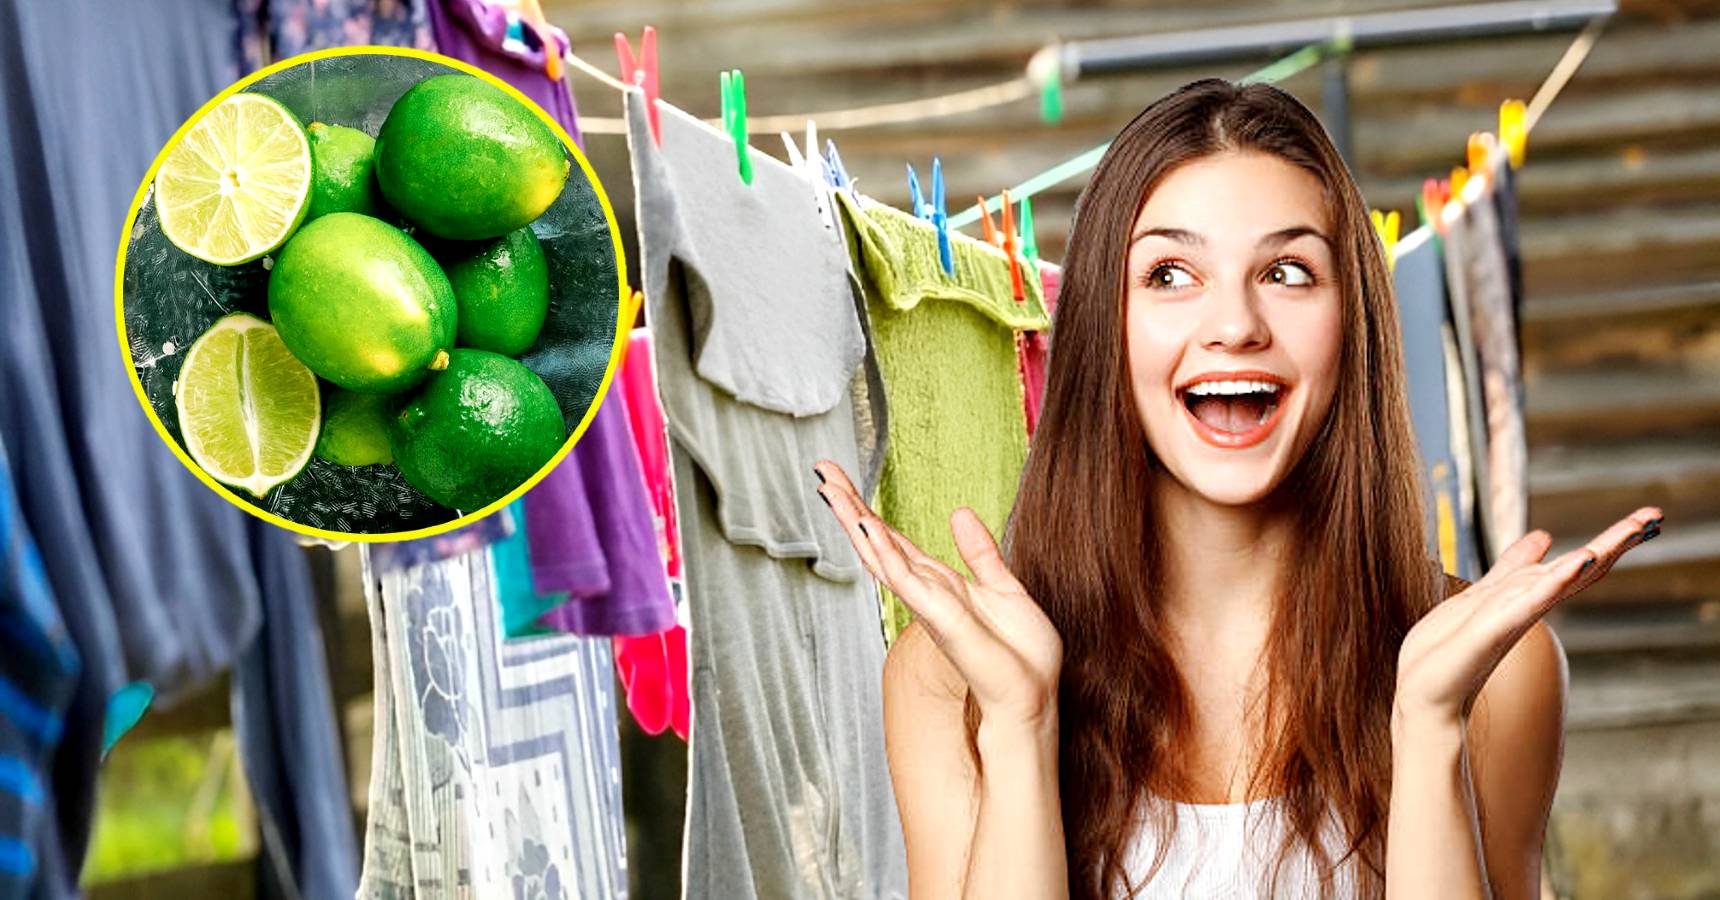 How to get rid of monsoon dampness and smell from clothes